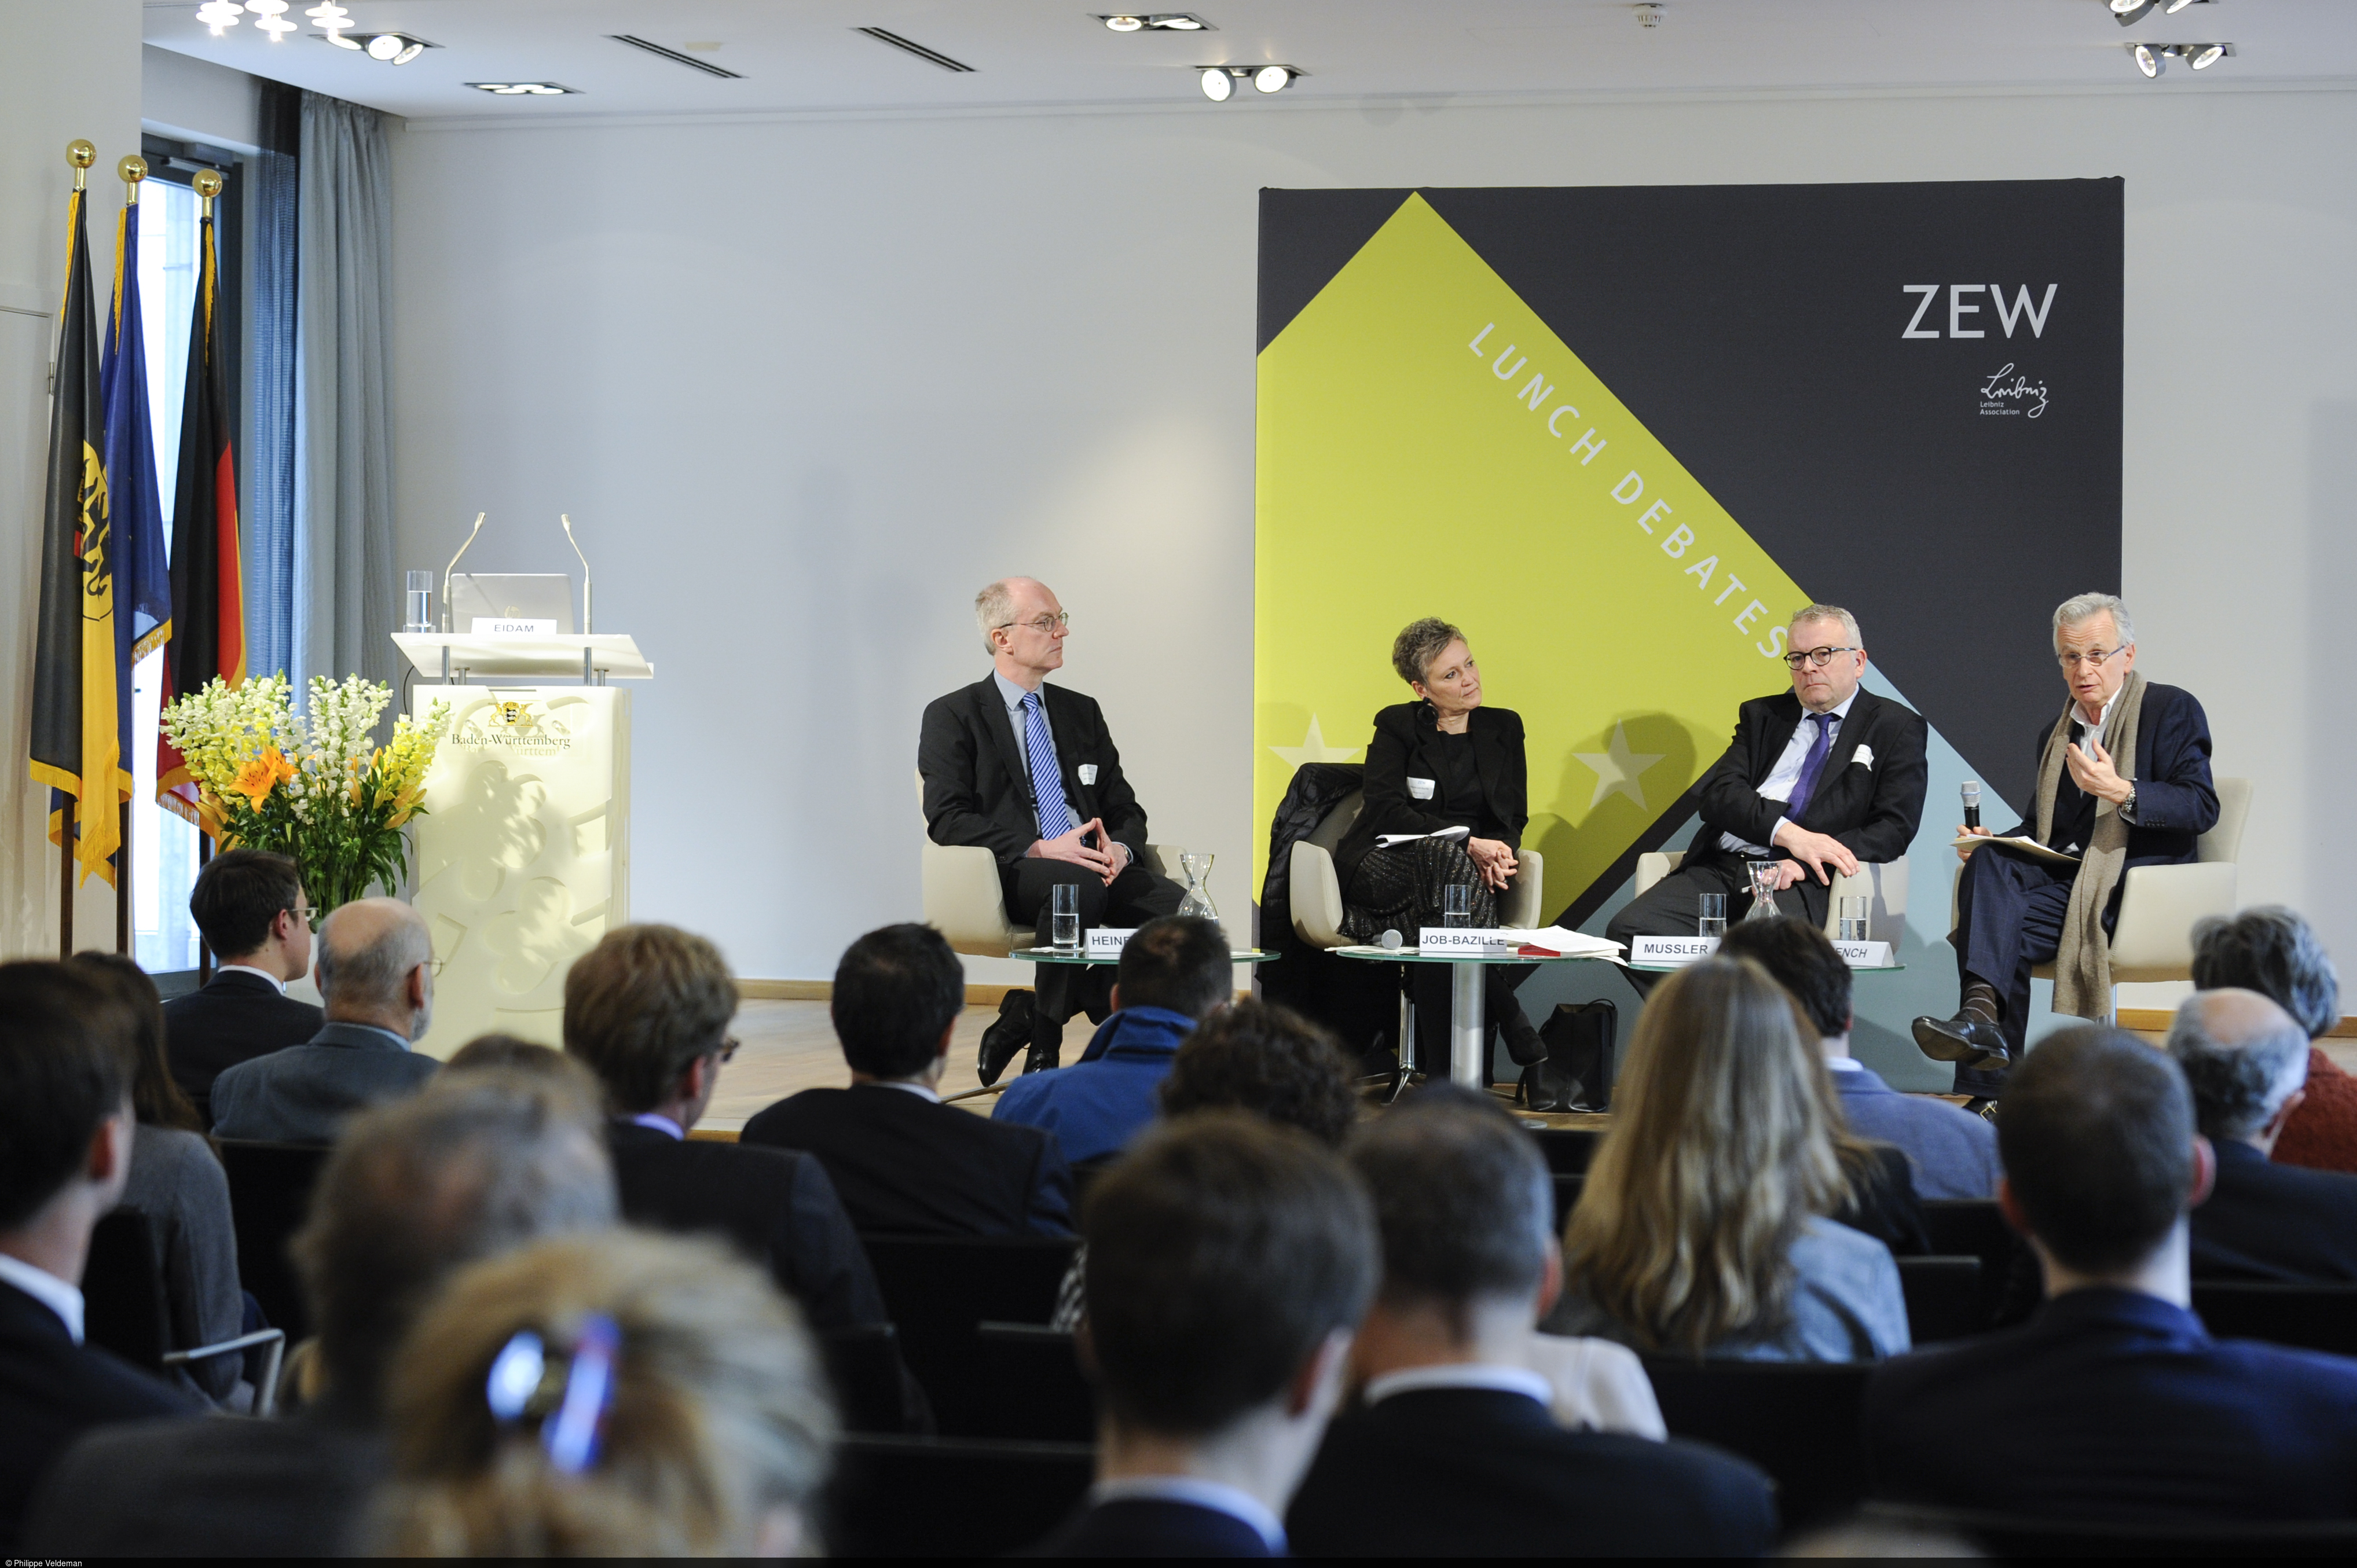 The ZEW Lunch Debate focused on sovereign over-indebtedness and courses of action for the EU